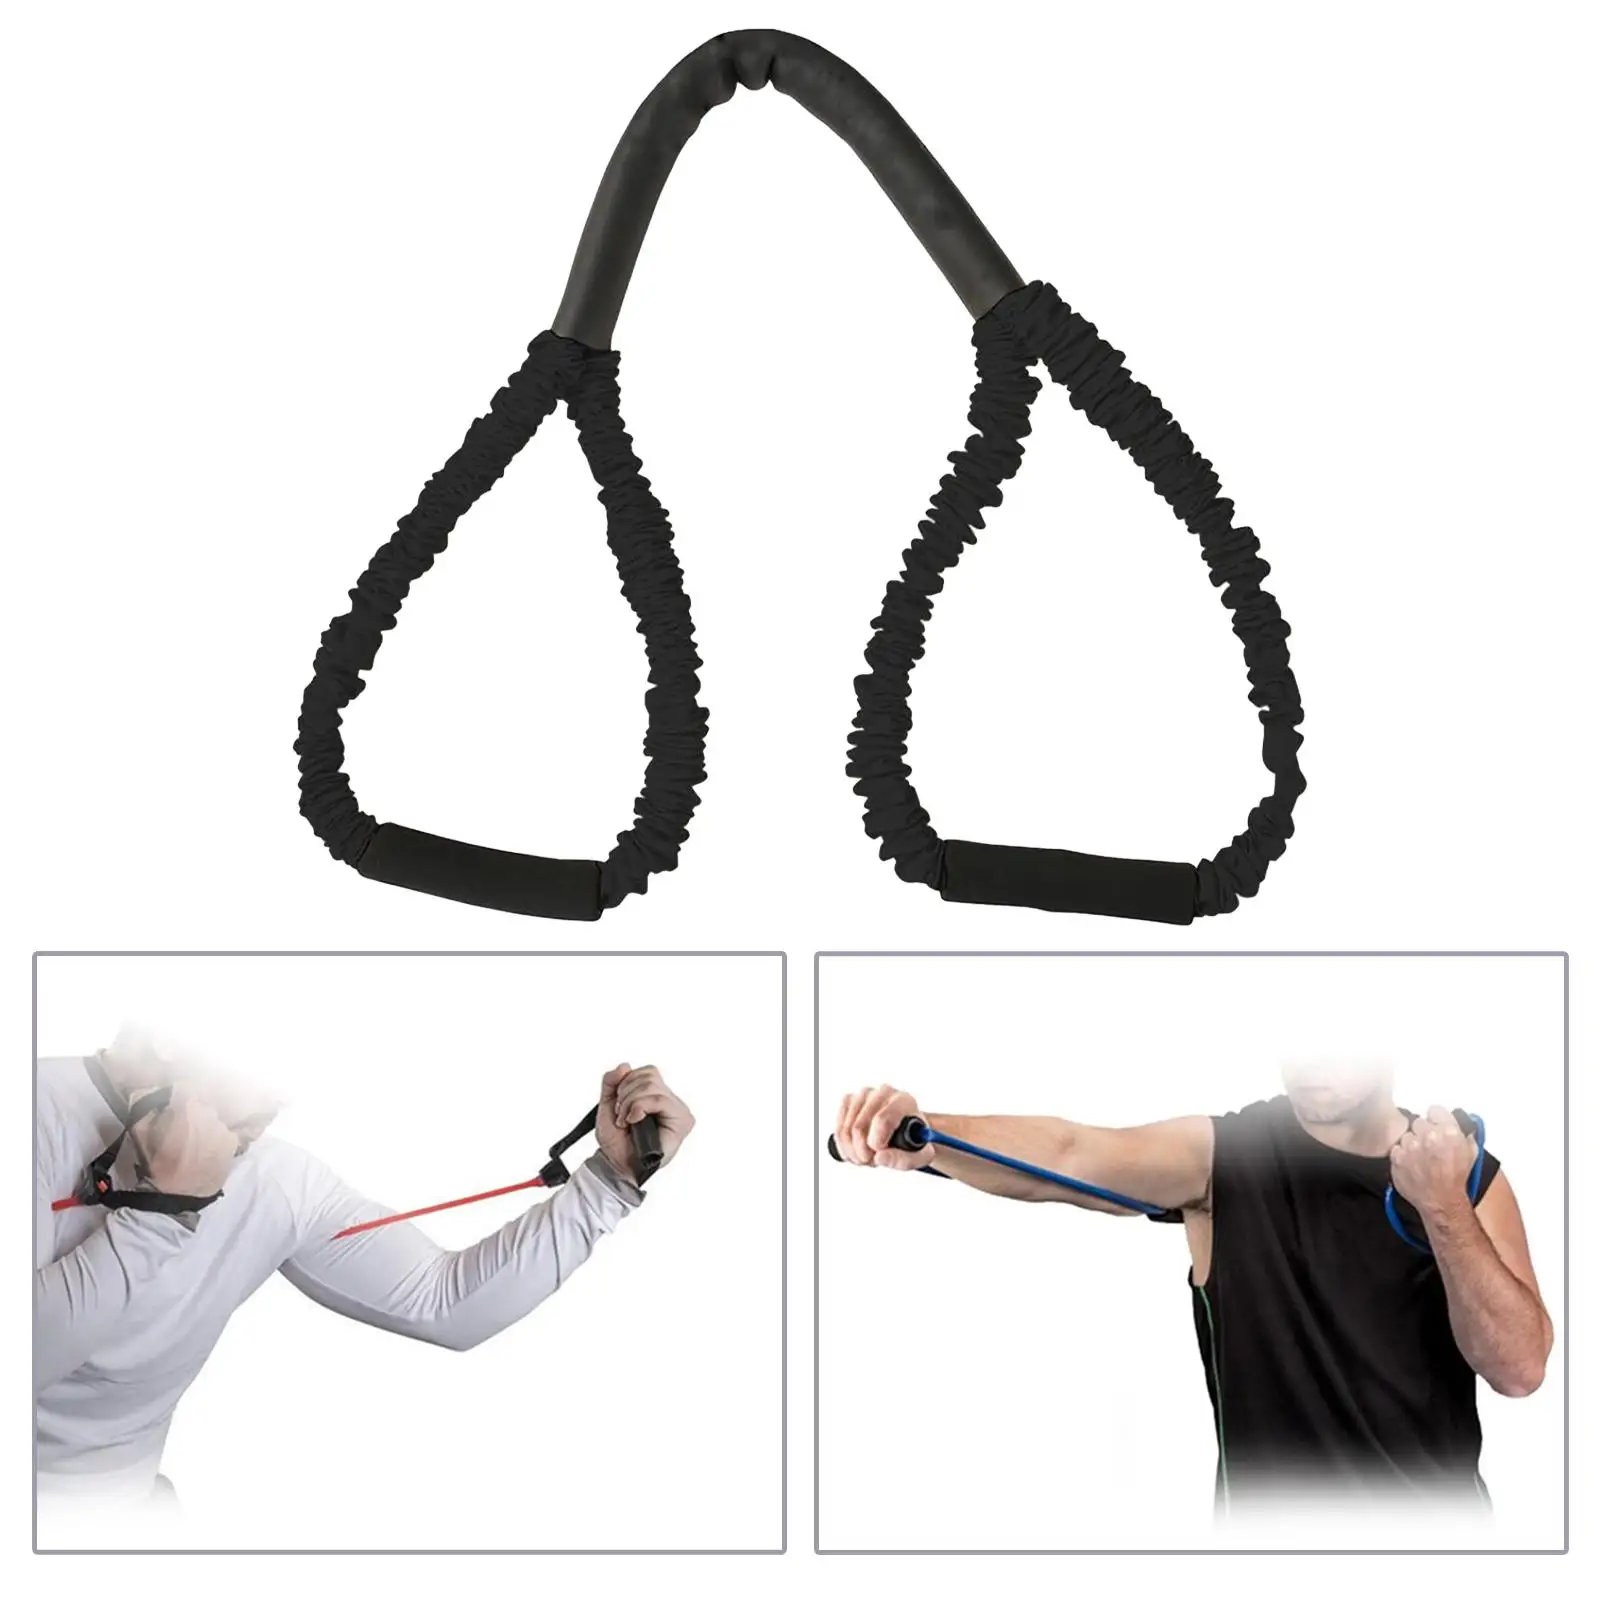 Boxing Resistance Bands Home Gym Basketball for Legs Arm Exercise Bands